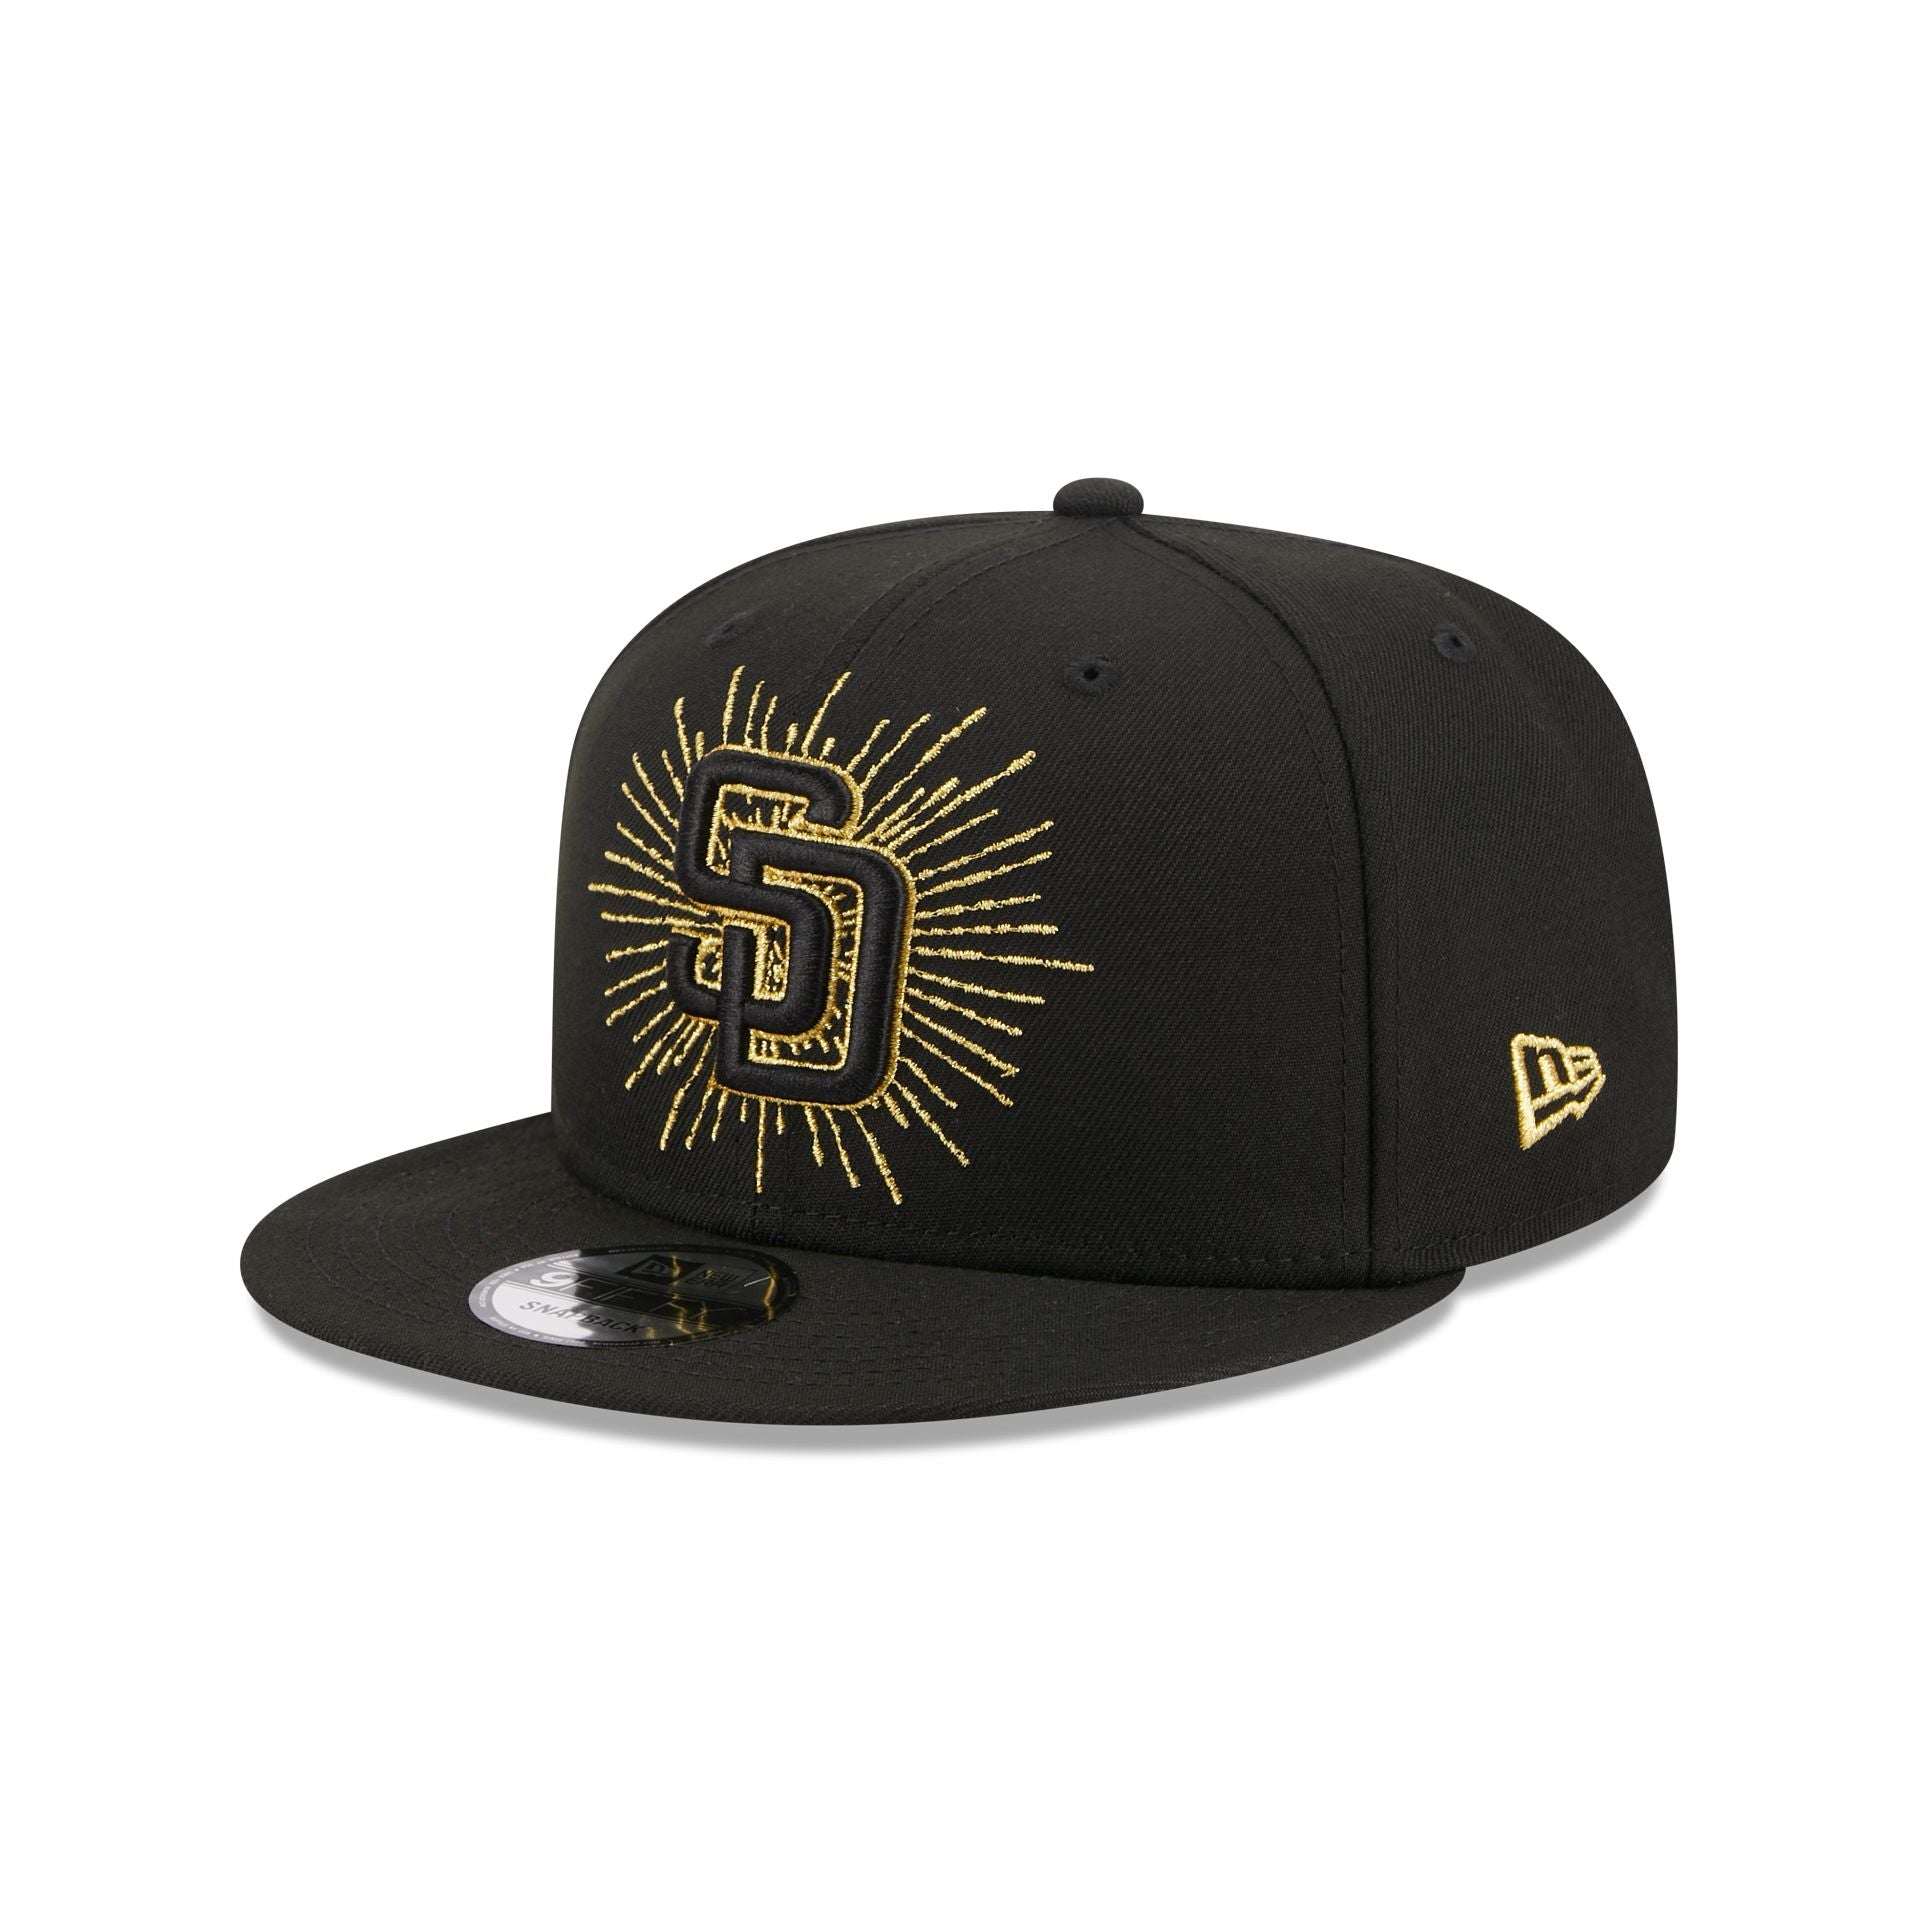 New Era Padres City Identity Fitted Cap